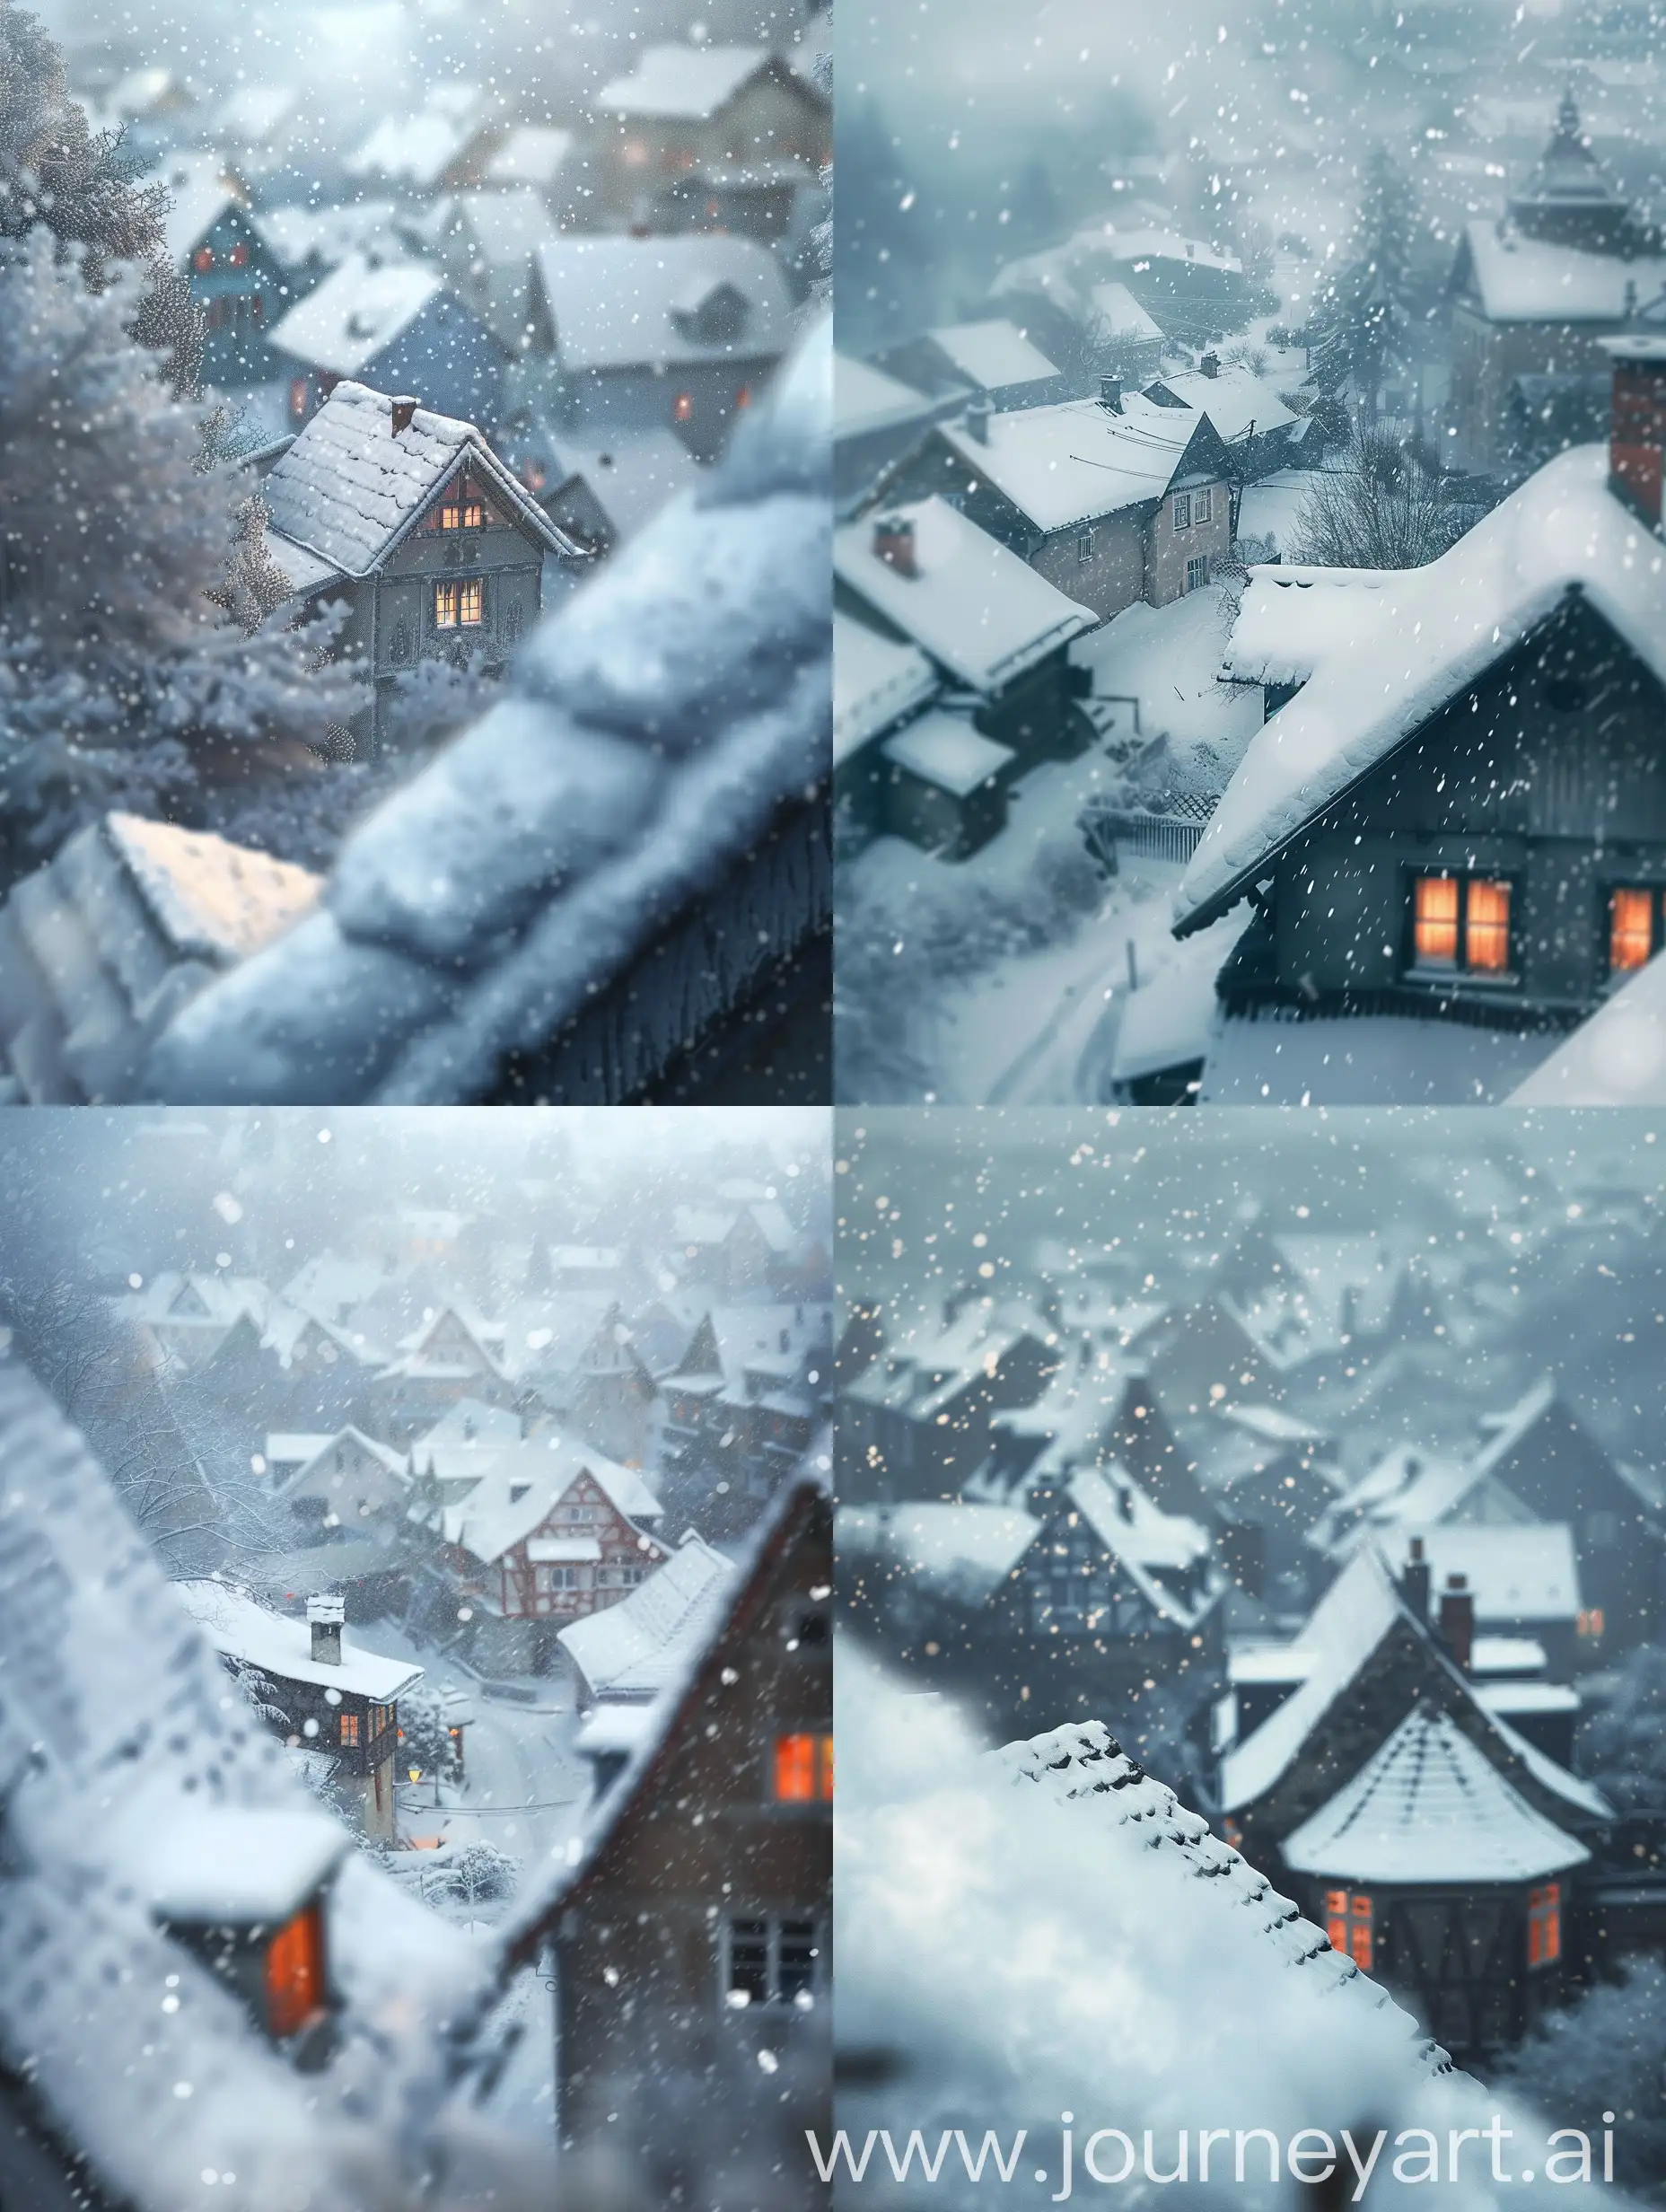  {
  "prompt": "An atmospheric, aerial view of a winter village scene, captured just after a snowfall has ended, with a hazy, soft focus effect to mimic a misty ambiance. The snowfall is random and natural, with uneven coverage on the rooftops and landscapes to reflect the spontaneous nature of falling snow. Snowdrifts should appear in a more organic pattern, with some rooftops partially clear, suggesting the snow has slid off unevenly. The composition includes a blurred foreground with part of a snow-covered rooftop to provide depth, and the houses should have a warm glow from the windows, contrasting with the cool, dusky sky.",
  "size": "1024x1024"
}
